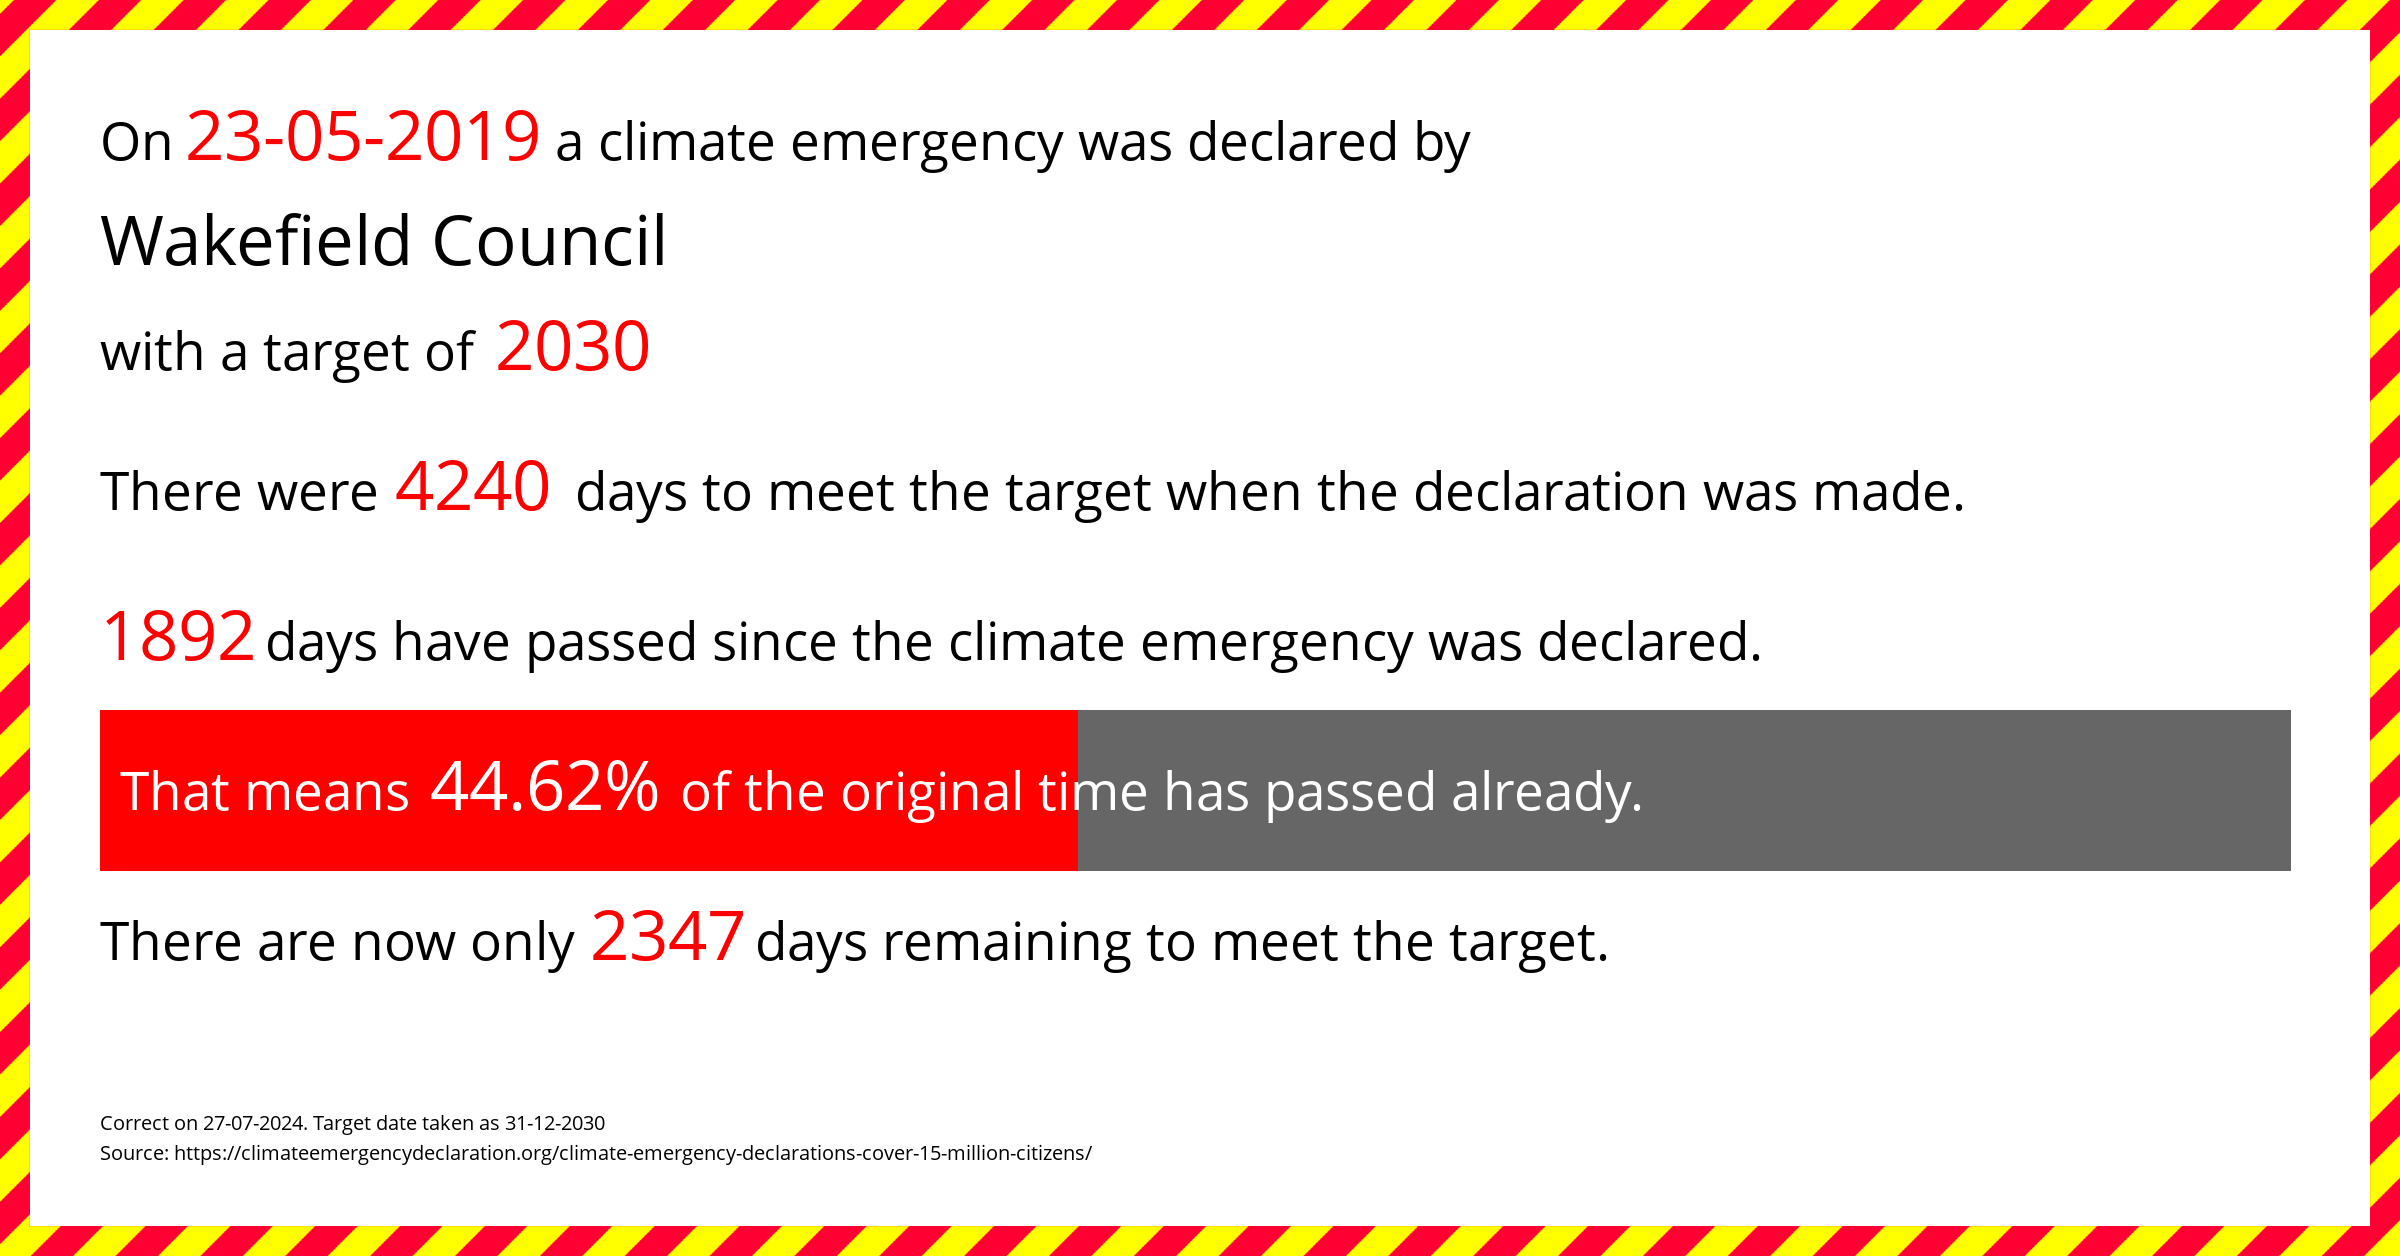 Wakefield Council declared a Climate emergency on Thursday 23rd May 2019, with a target of 2030.